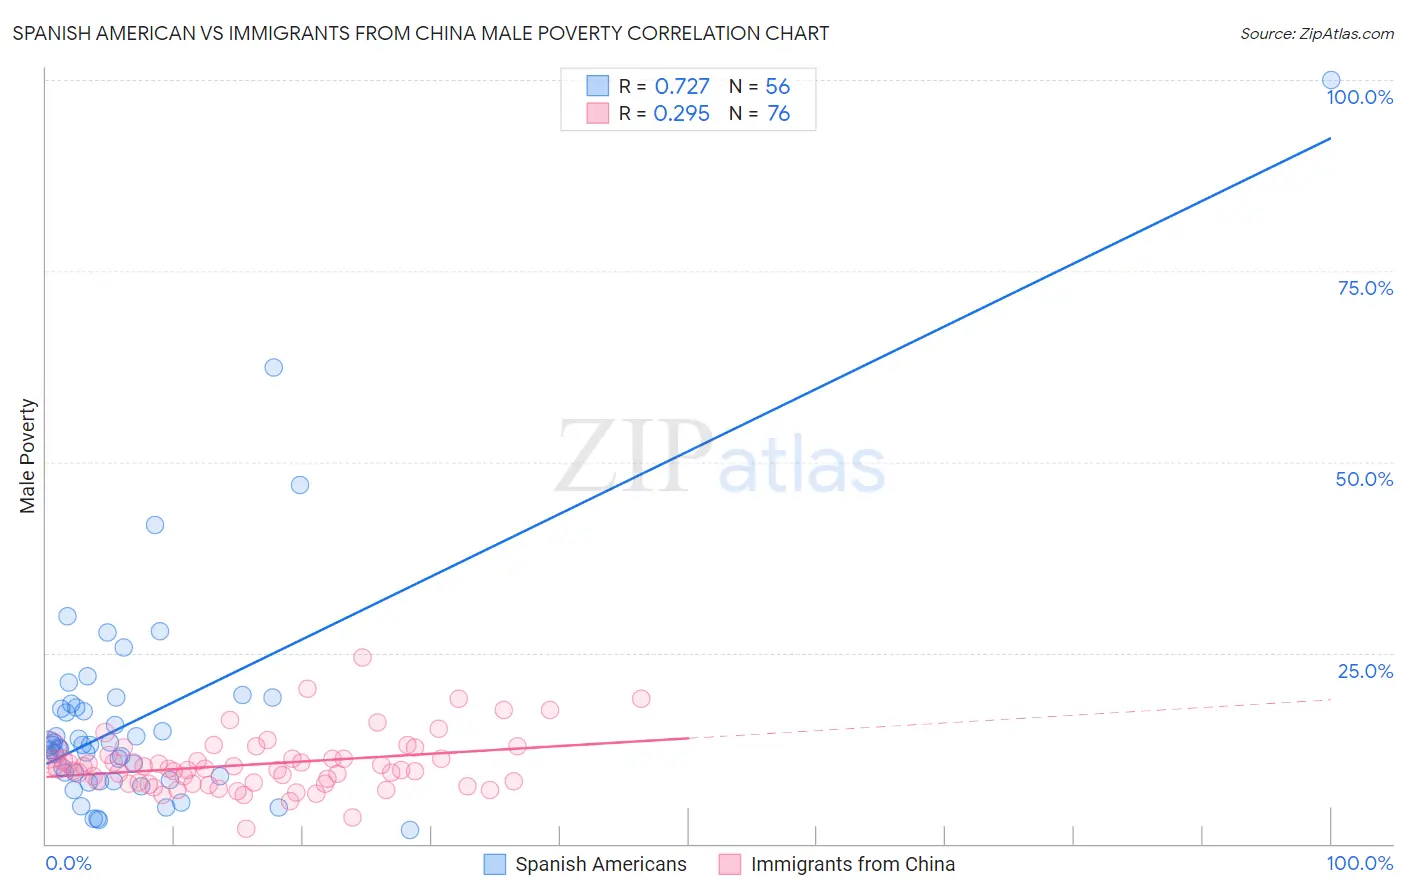 Spanish American vs Immigrants from China Male Poverty